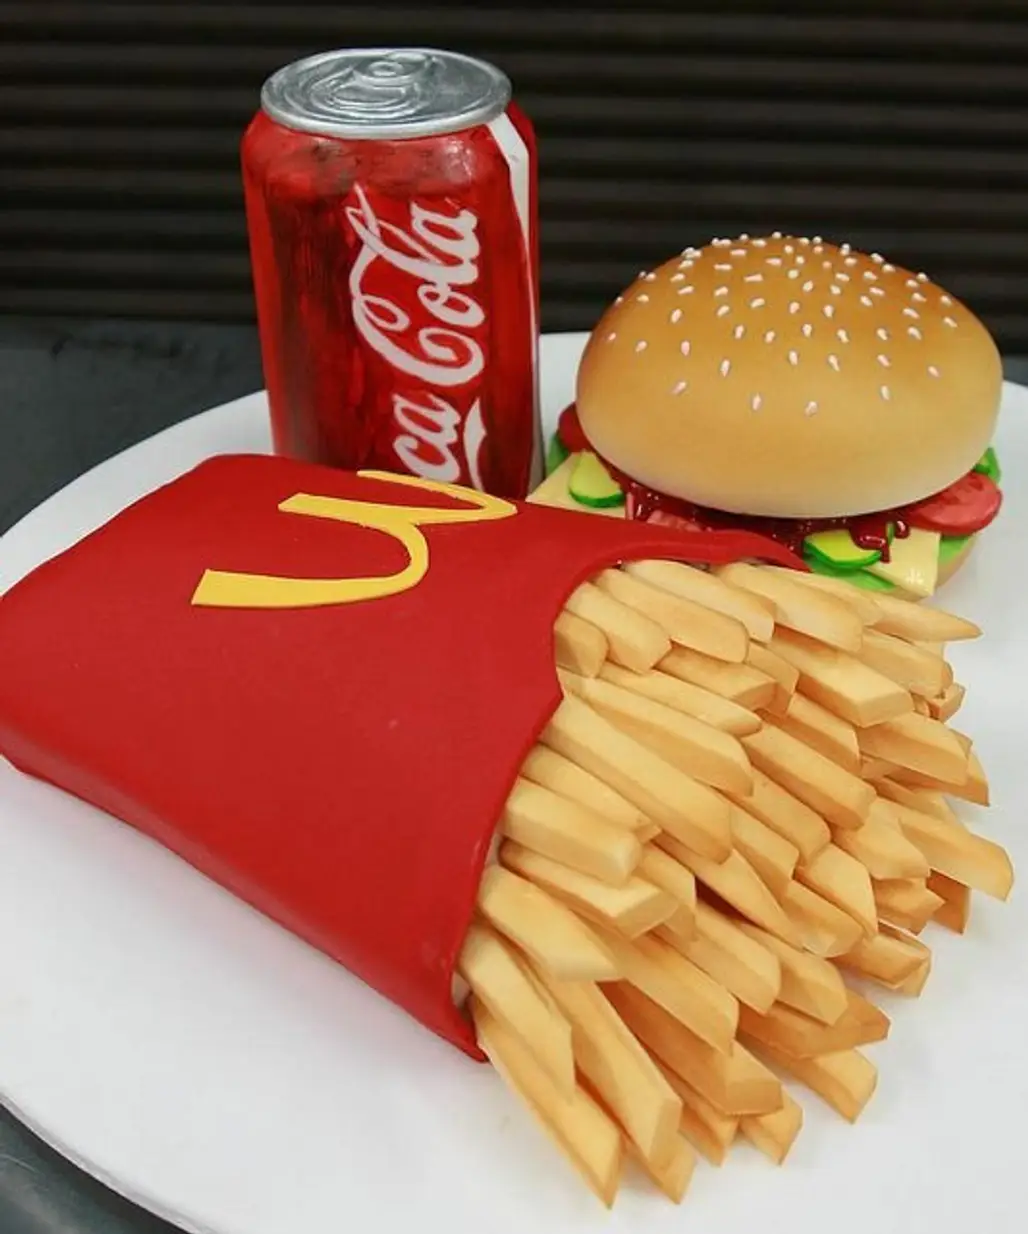 Fast Food Meal from Mcdonald's